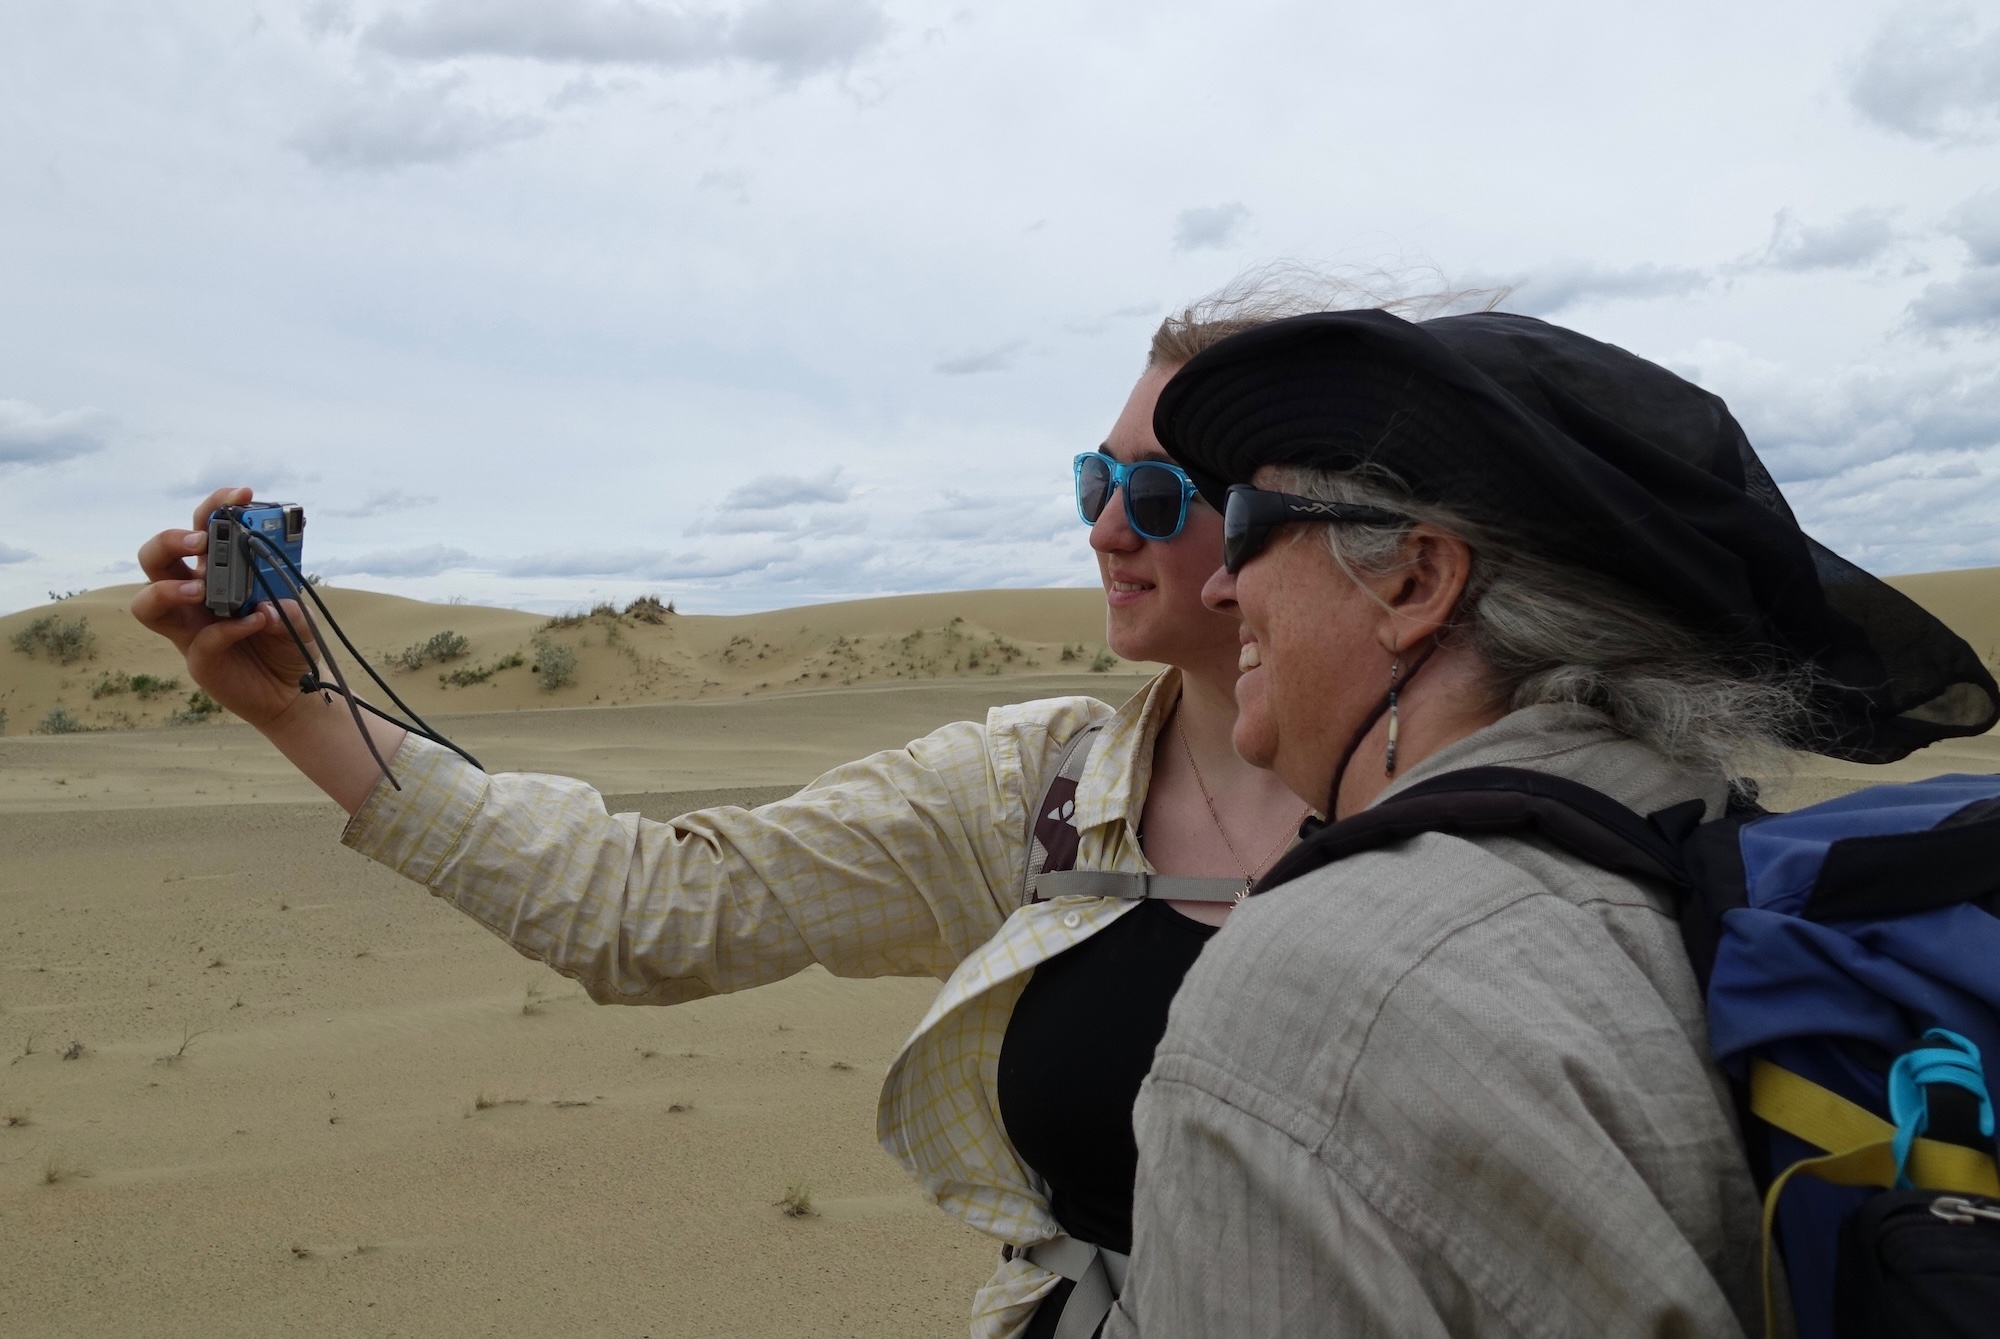 Two women smile while taking a self-portrait in an expanse of sand studded with short vegetation.